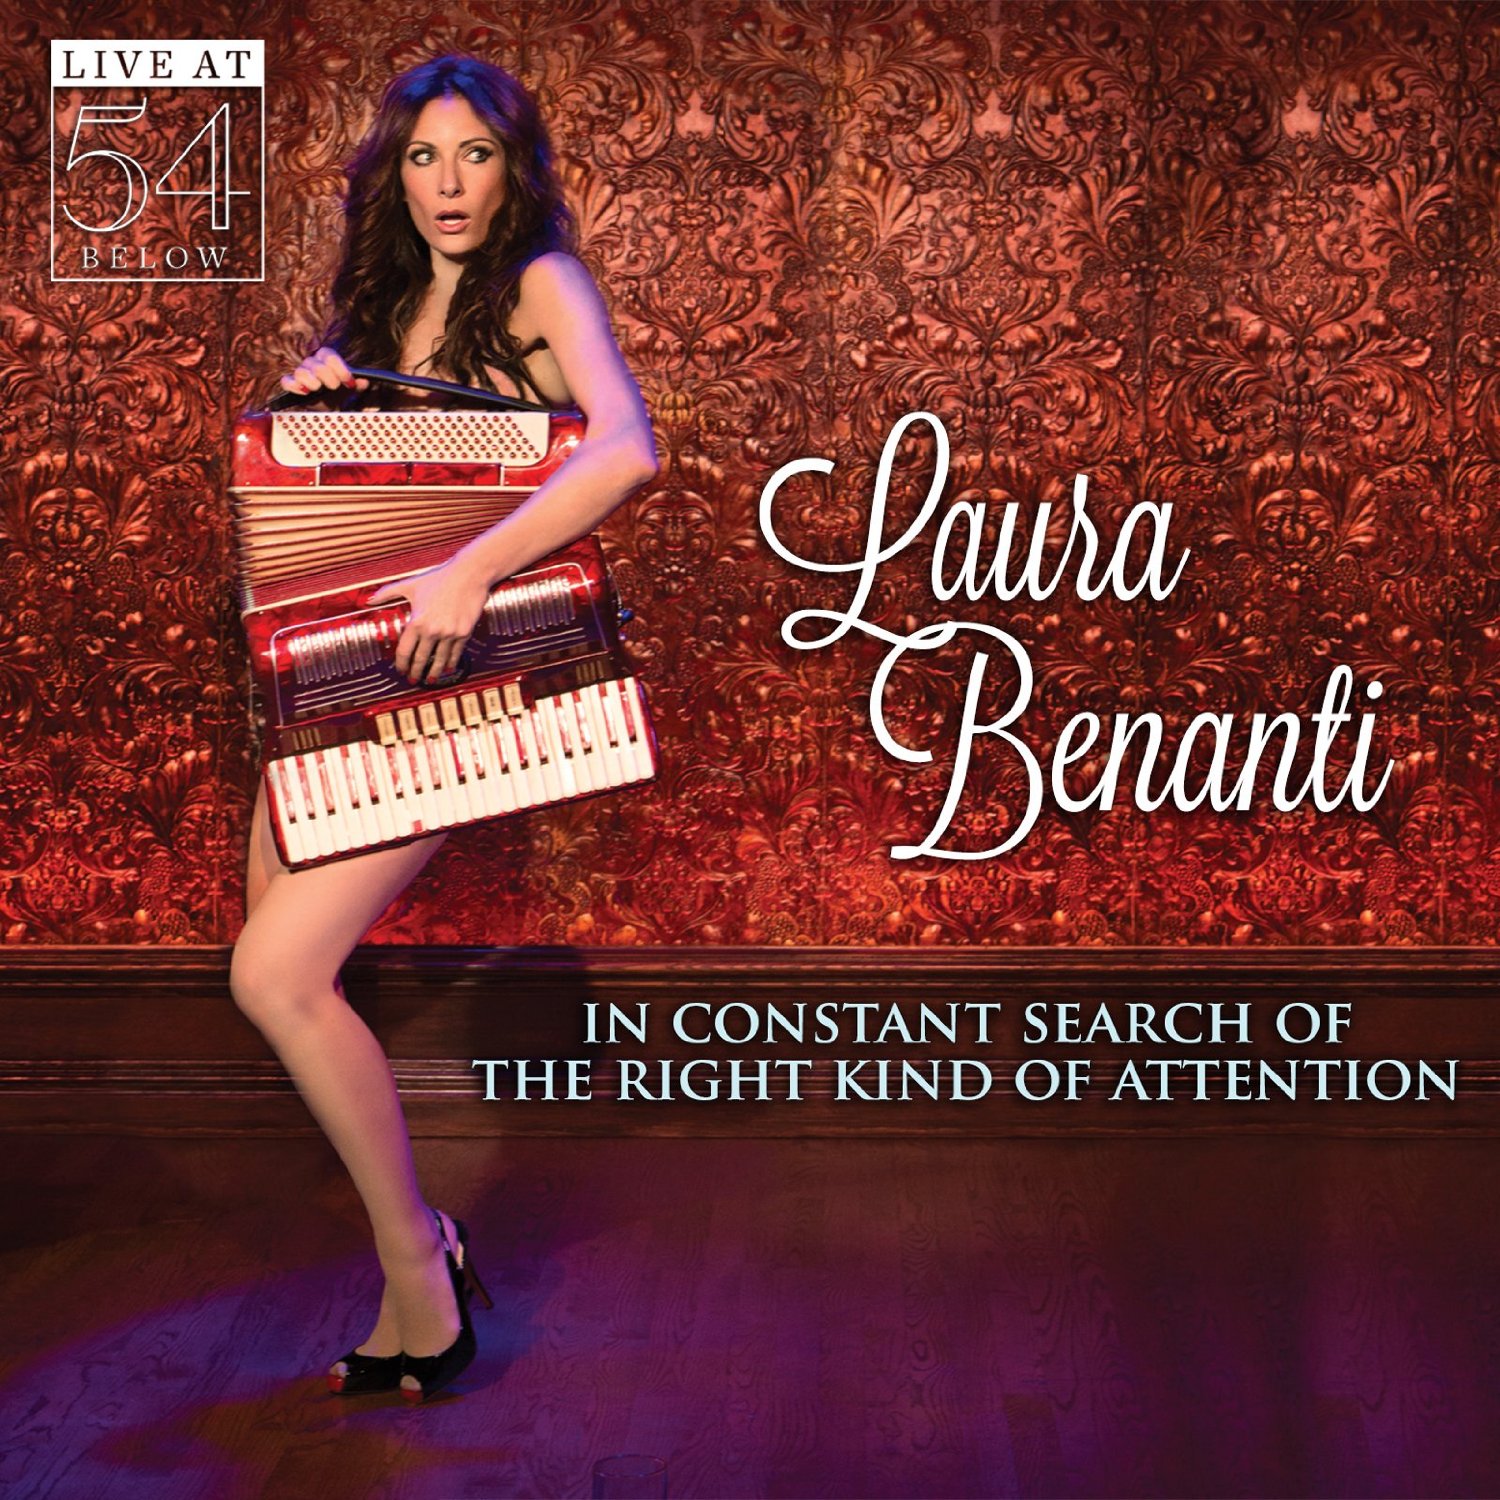 LAURA BENANTI - In Constant Search of the Right Kind of Attention: Live At 54 cover 